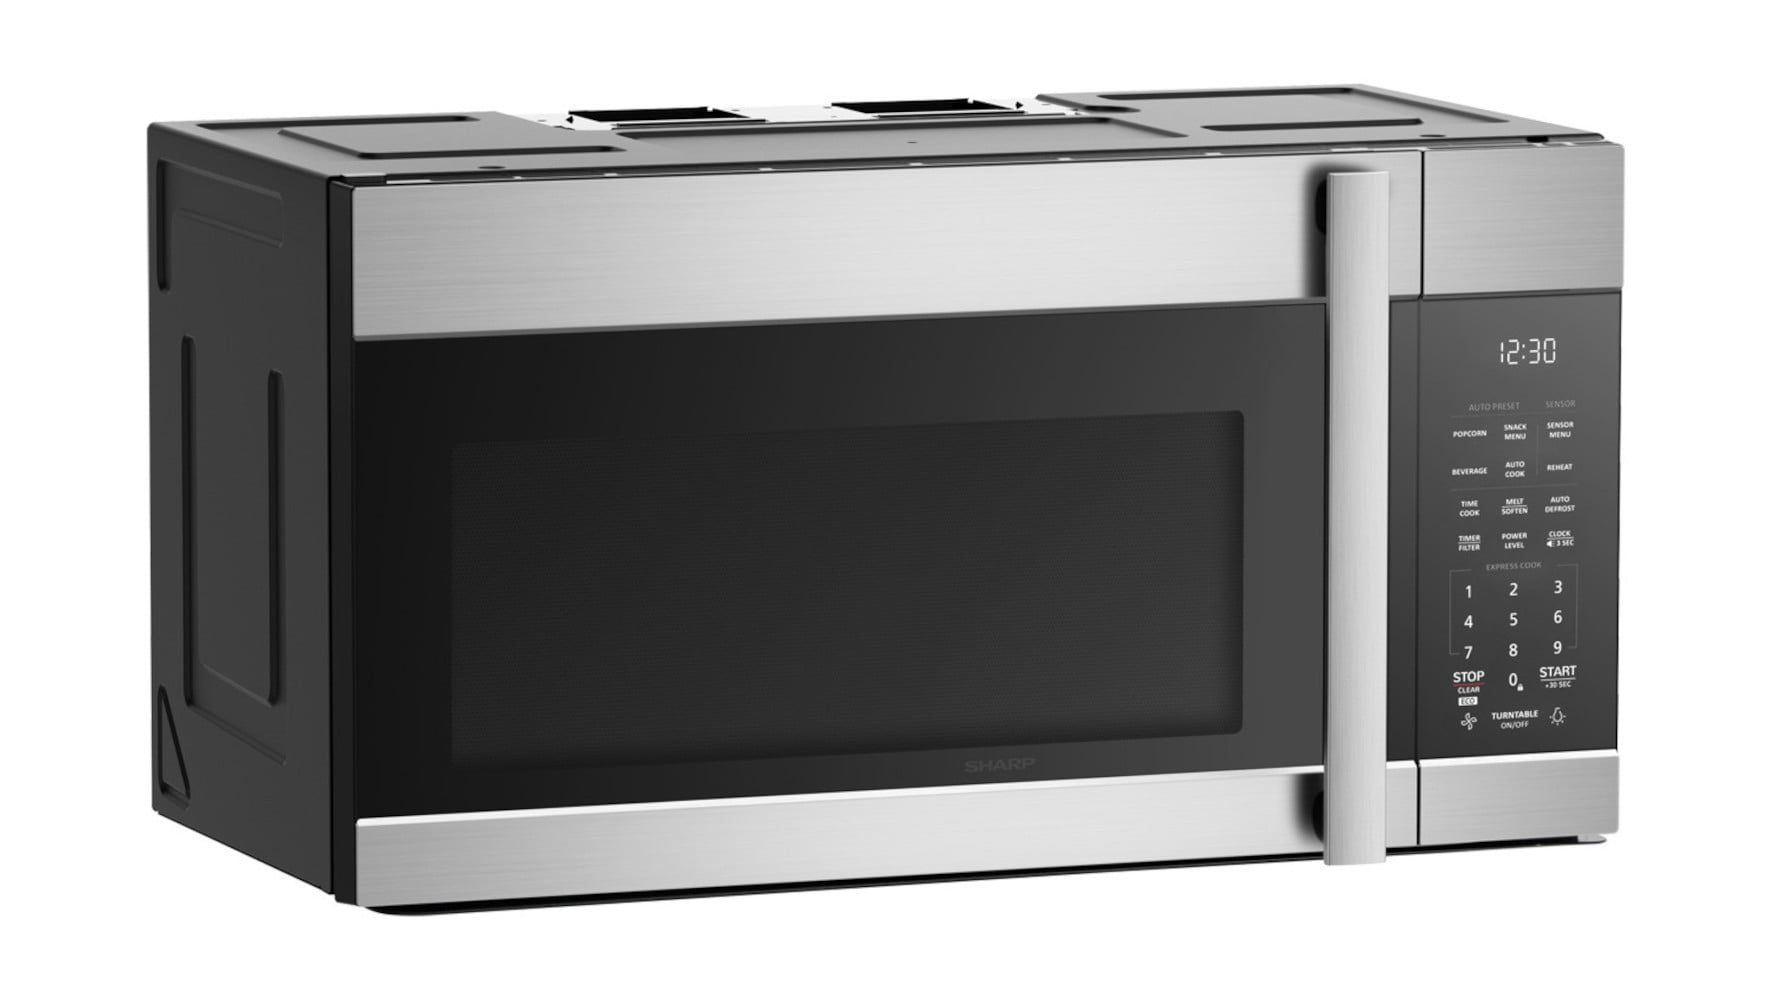 stainless countertop microwave ovens sears